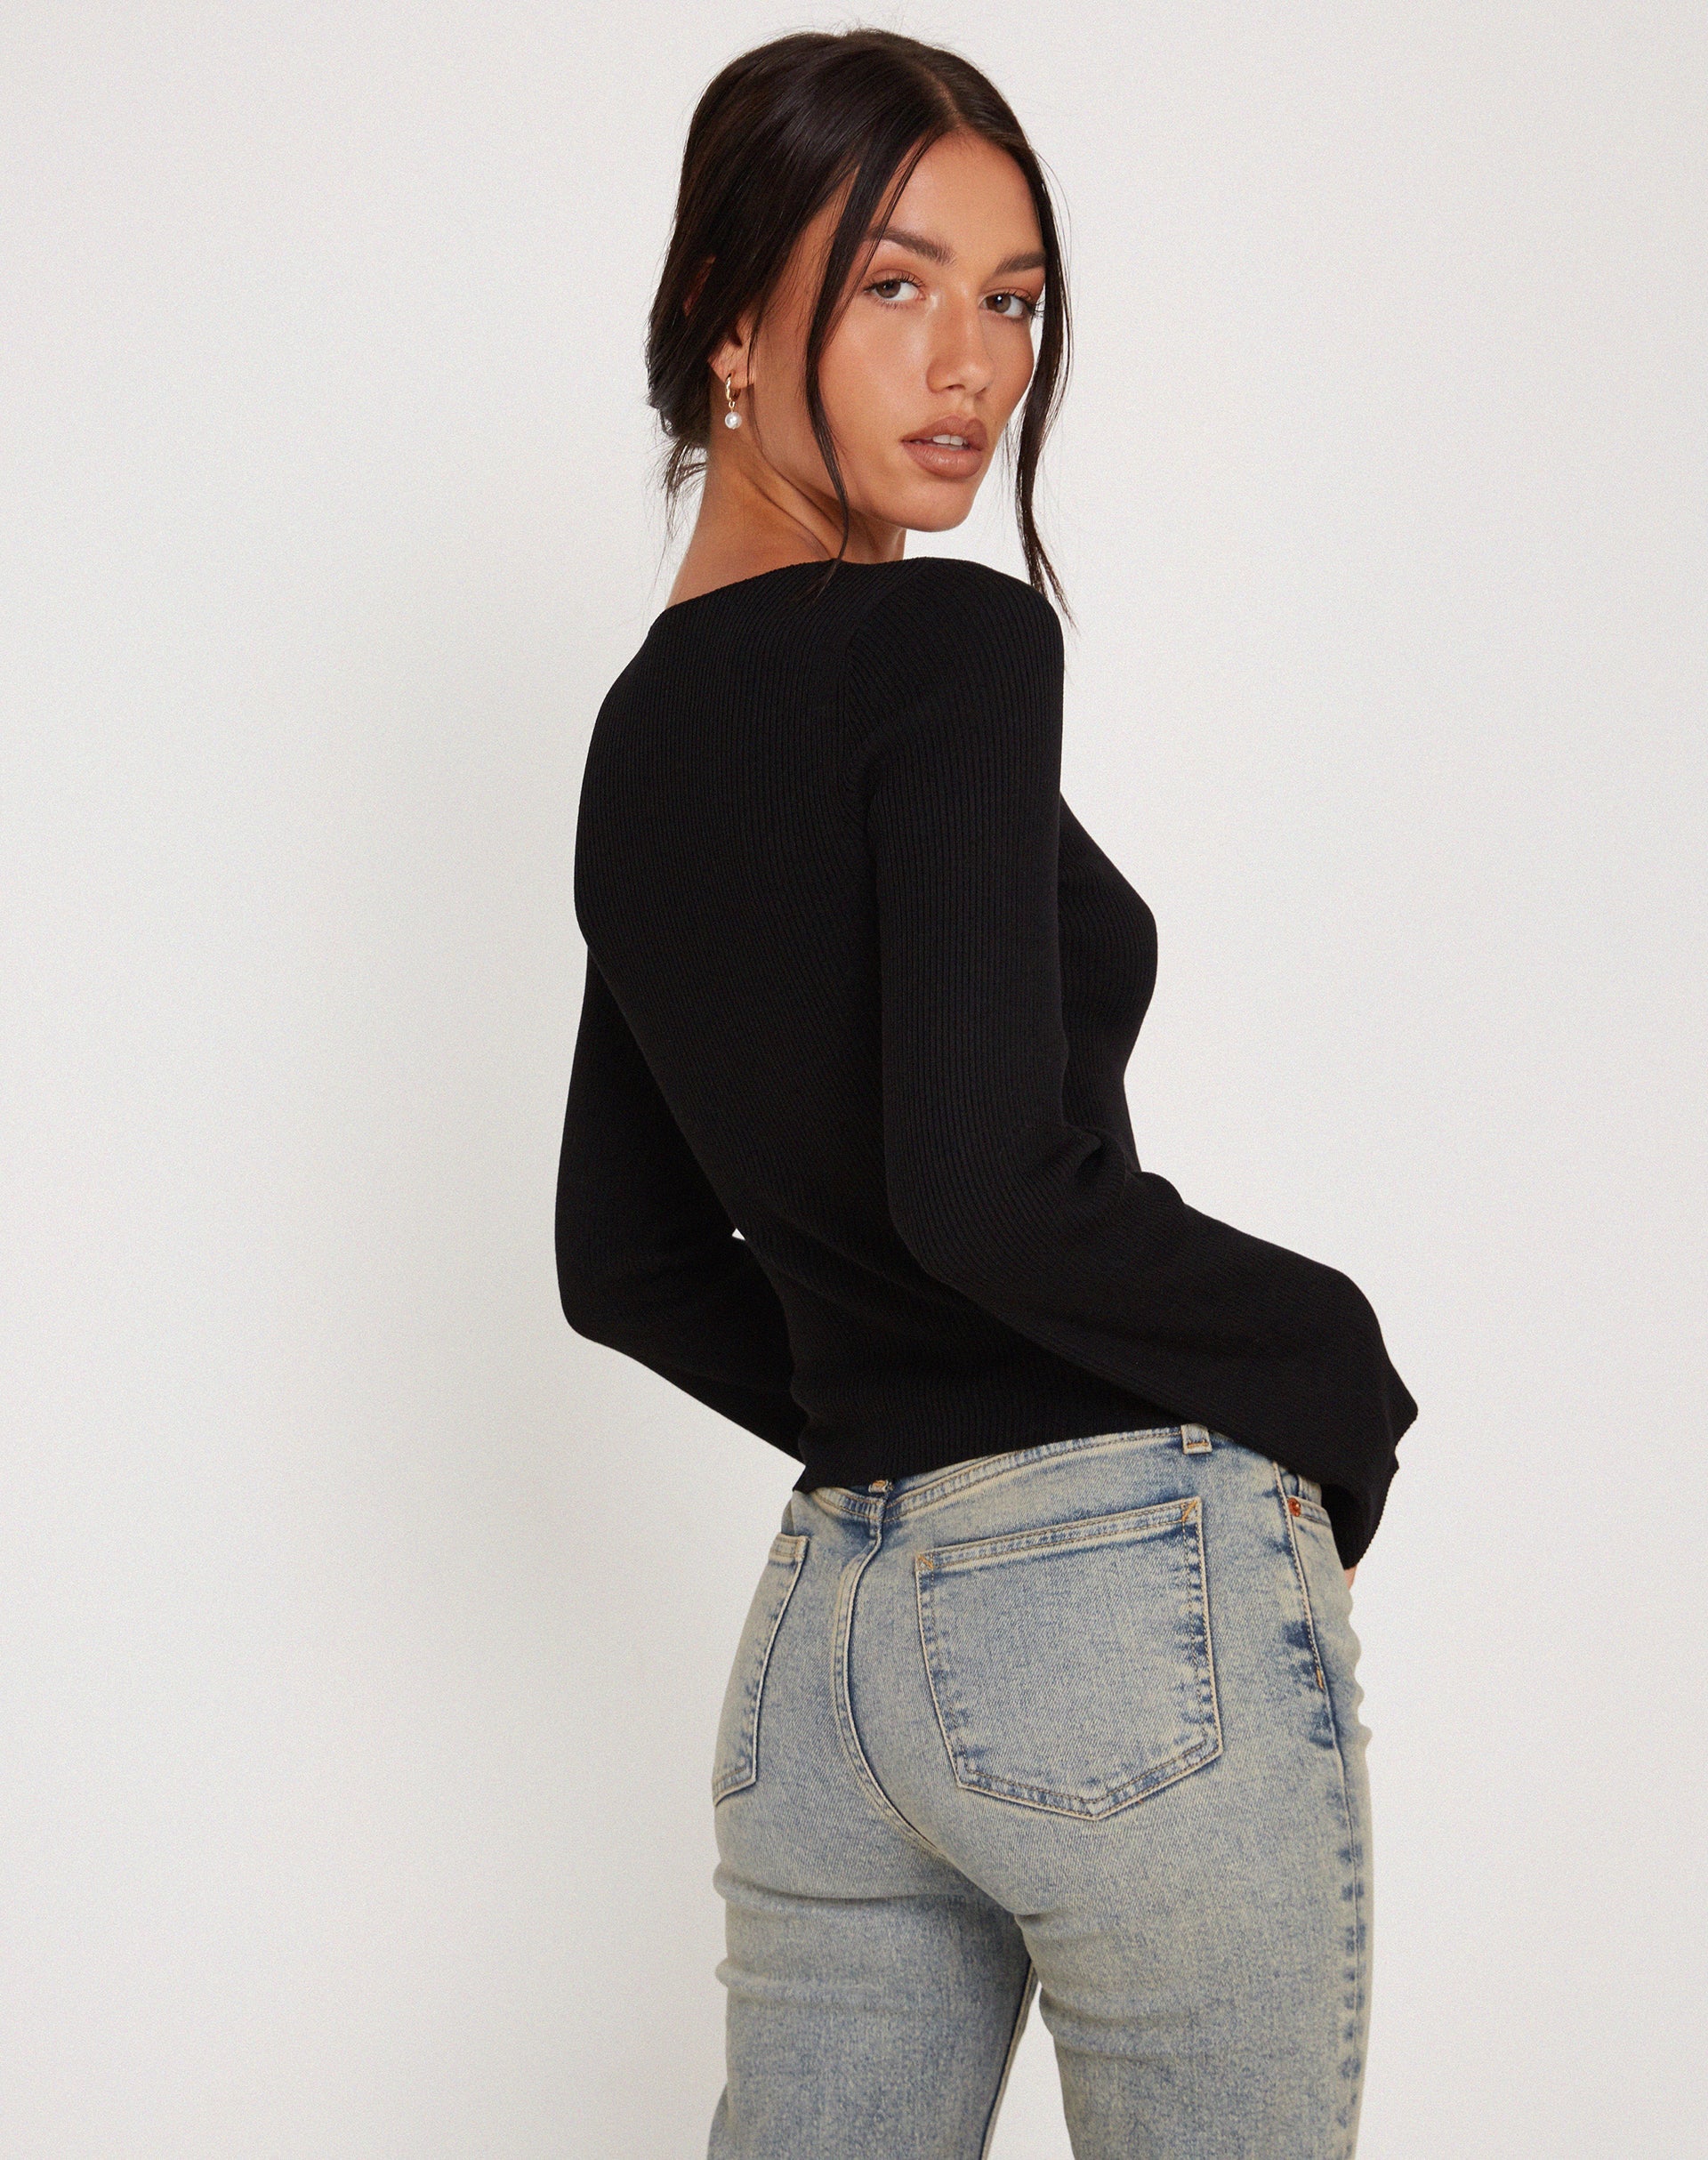 Lucca Long Sleeve Top in Lace Black